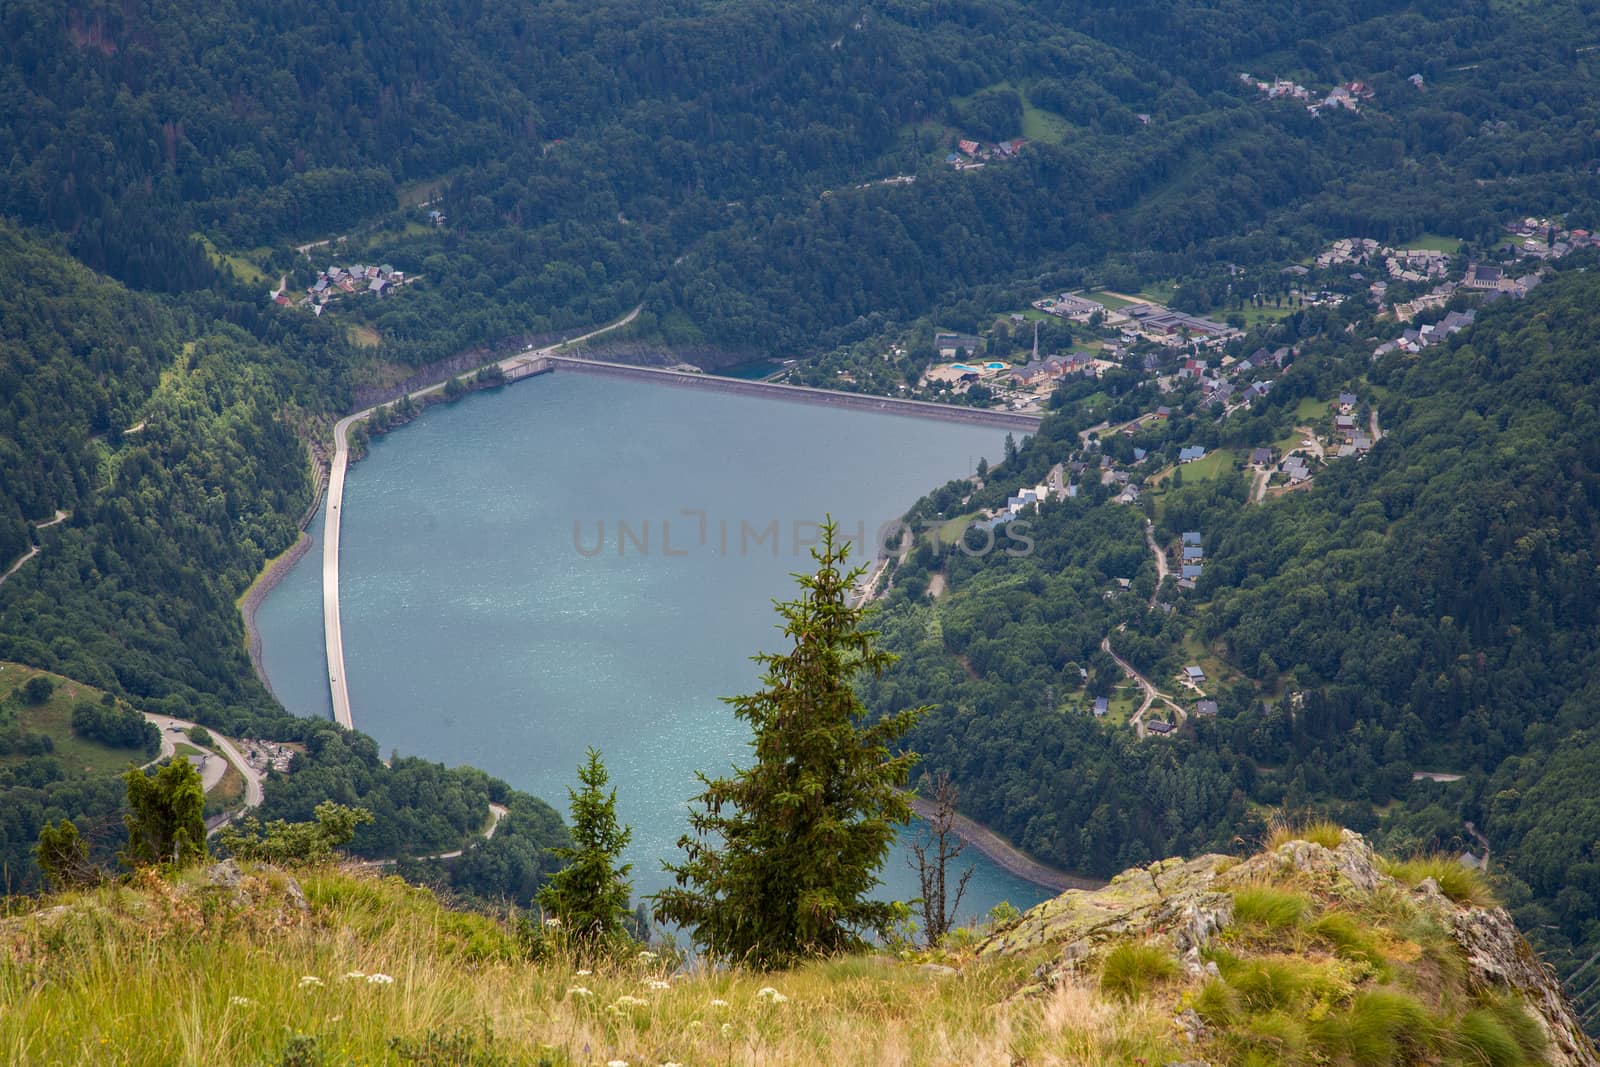 The lower reservoir of Lac du Verney. It is the largest hydroelectric power station in France